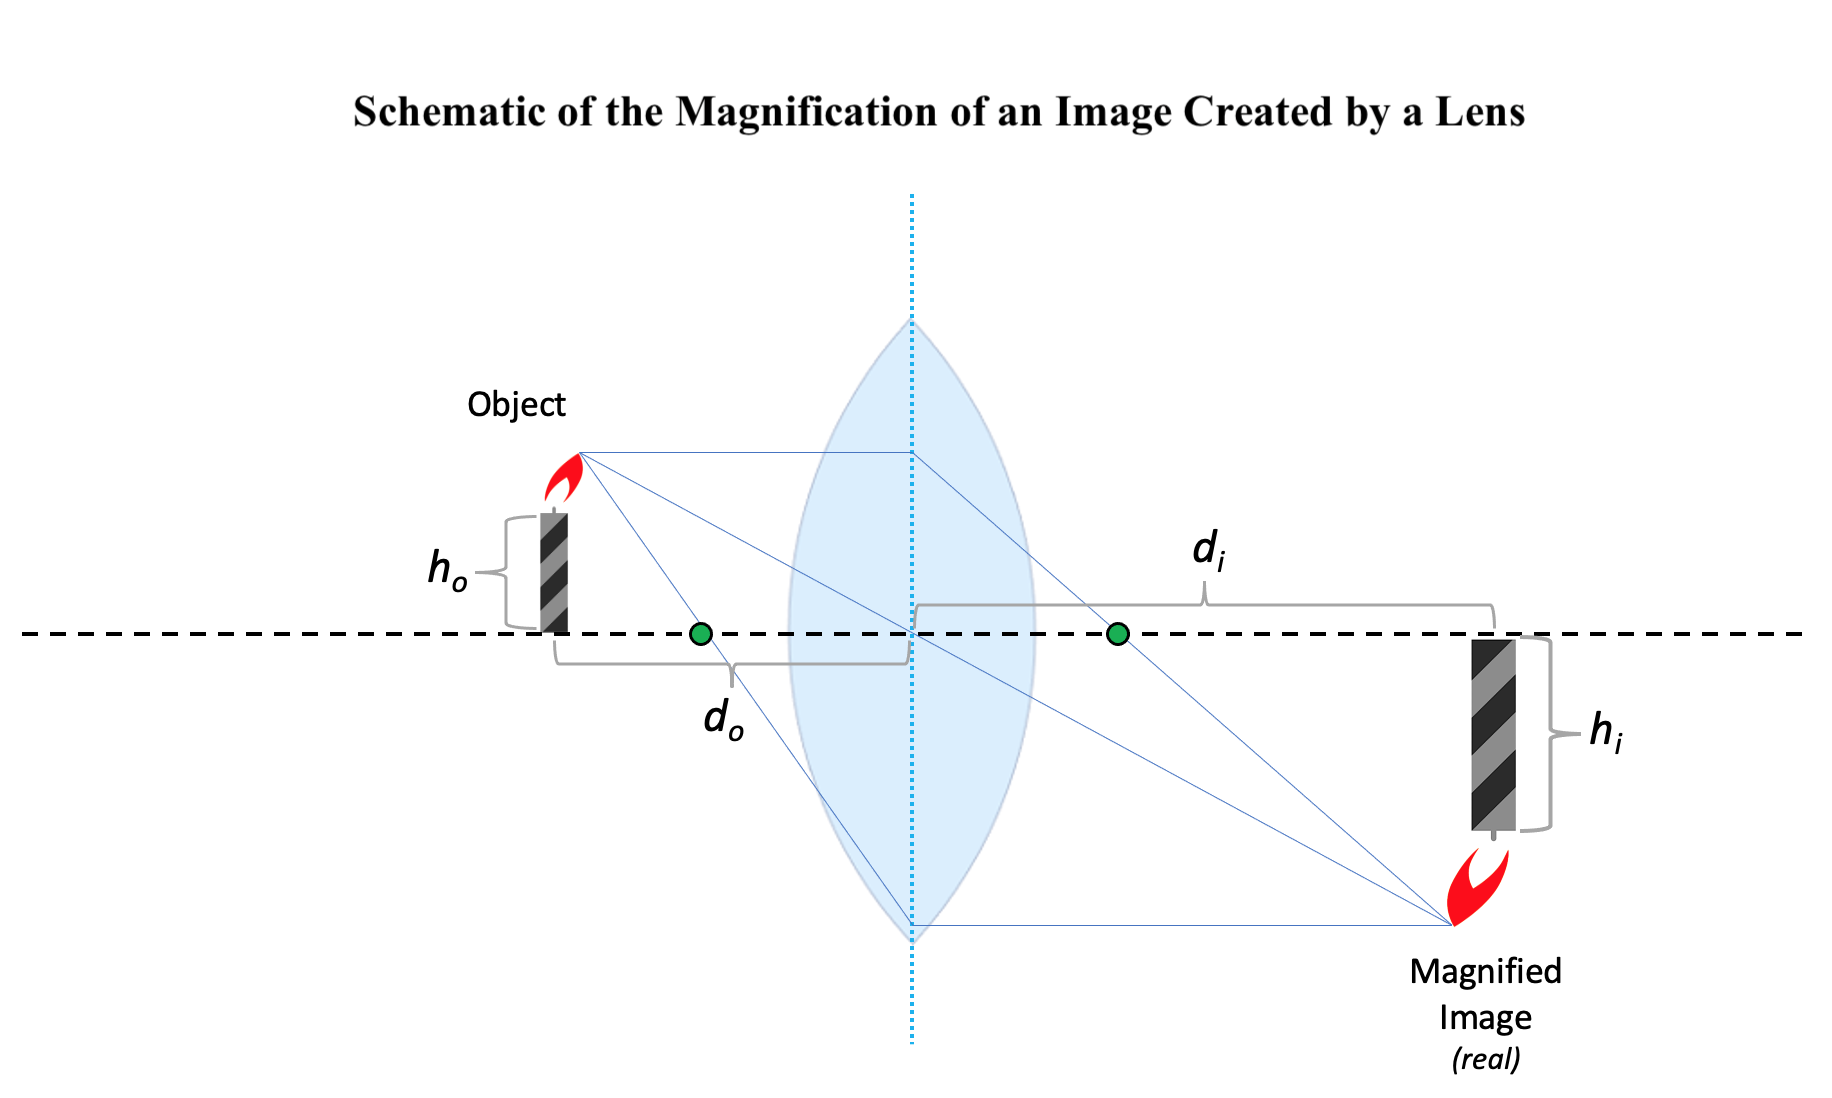 <p>Magnification of an Image Created by a Lens